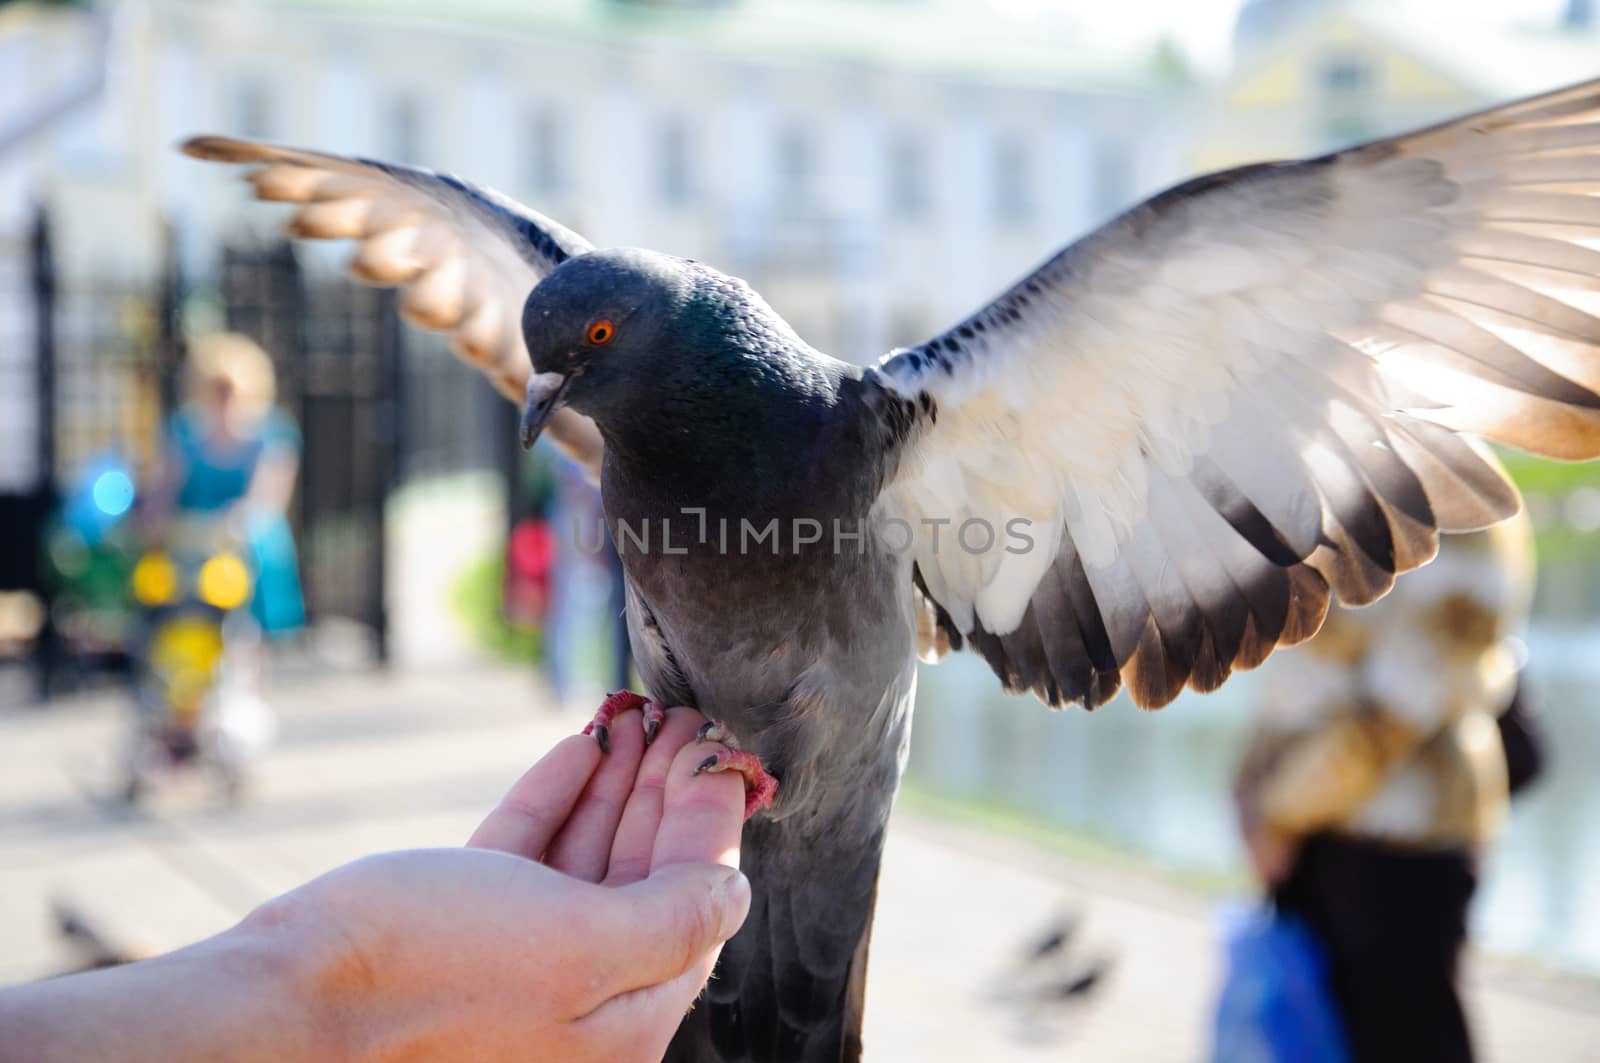 Pigeon sitting on the hand with stretched wings close-up, Sergiev Posad, Moscow region, Russia